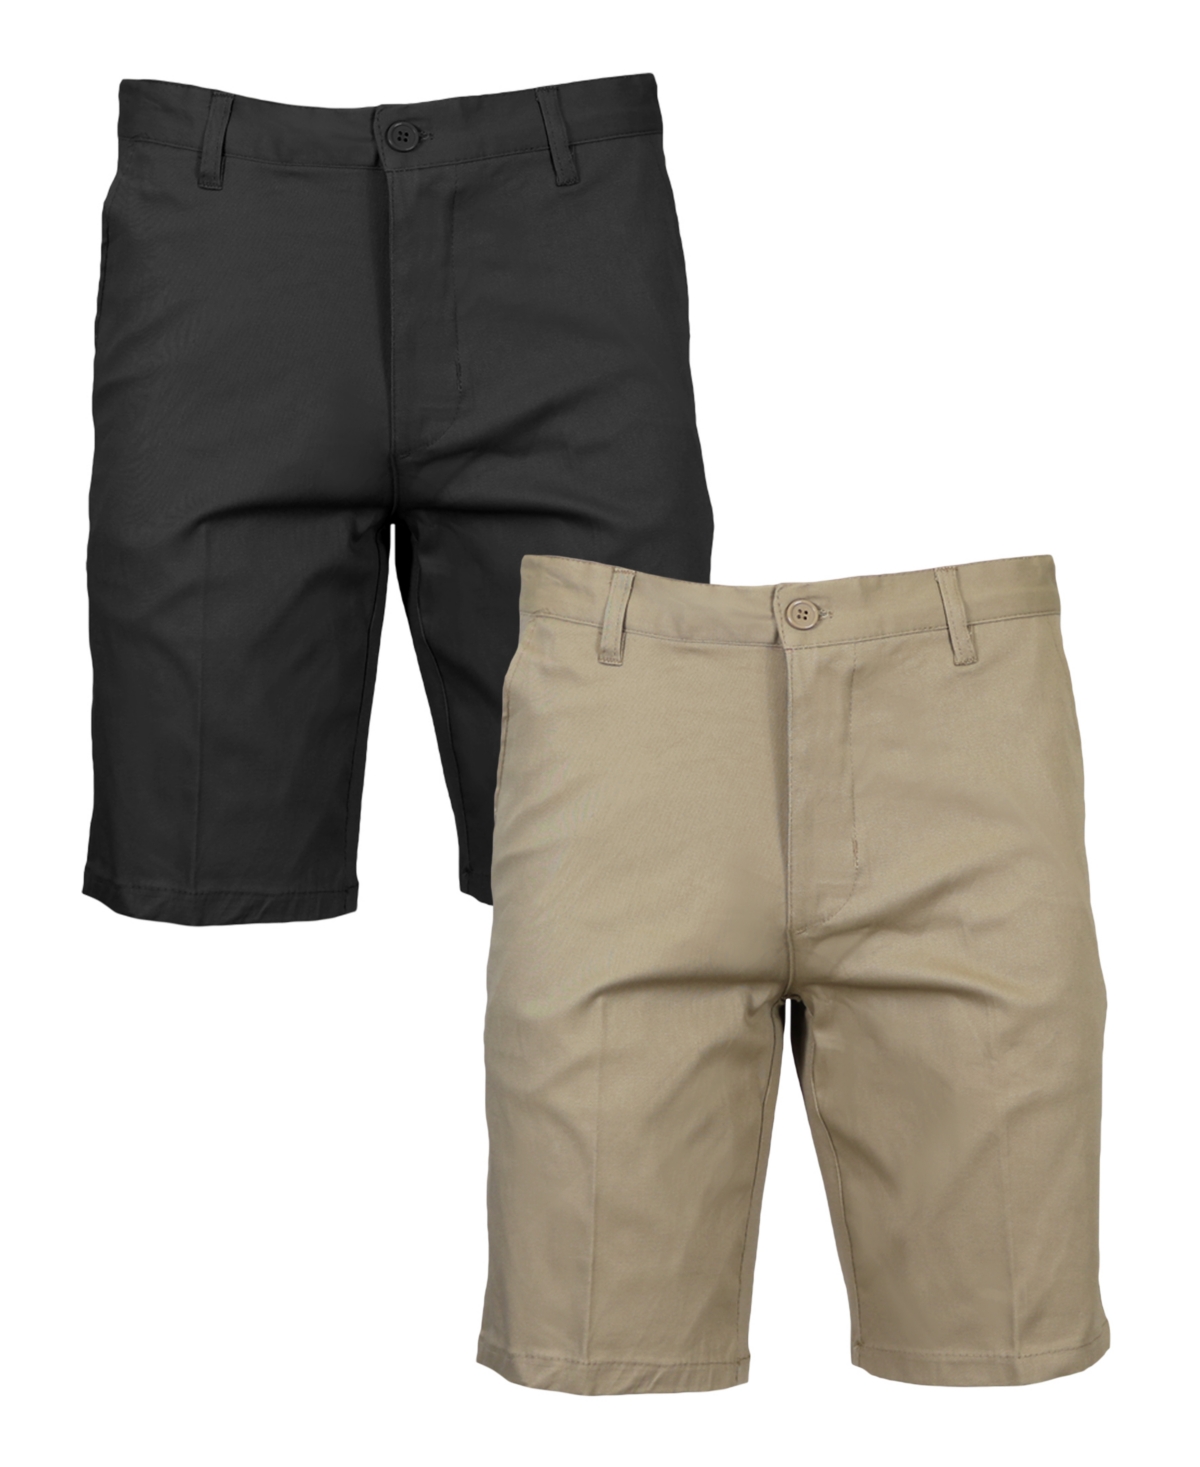 Galaxy By Harvic Men's Slim Fitting Cotton Flex Stretch Chino Shorts, Pack Of 2 In Black Khaki